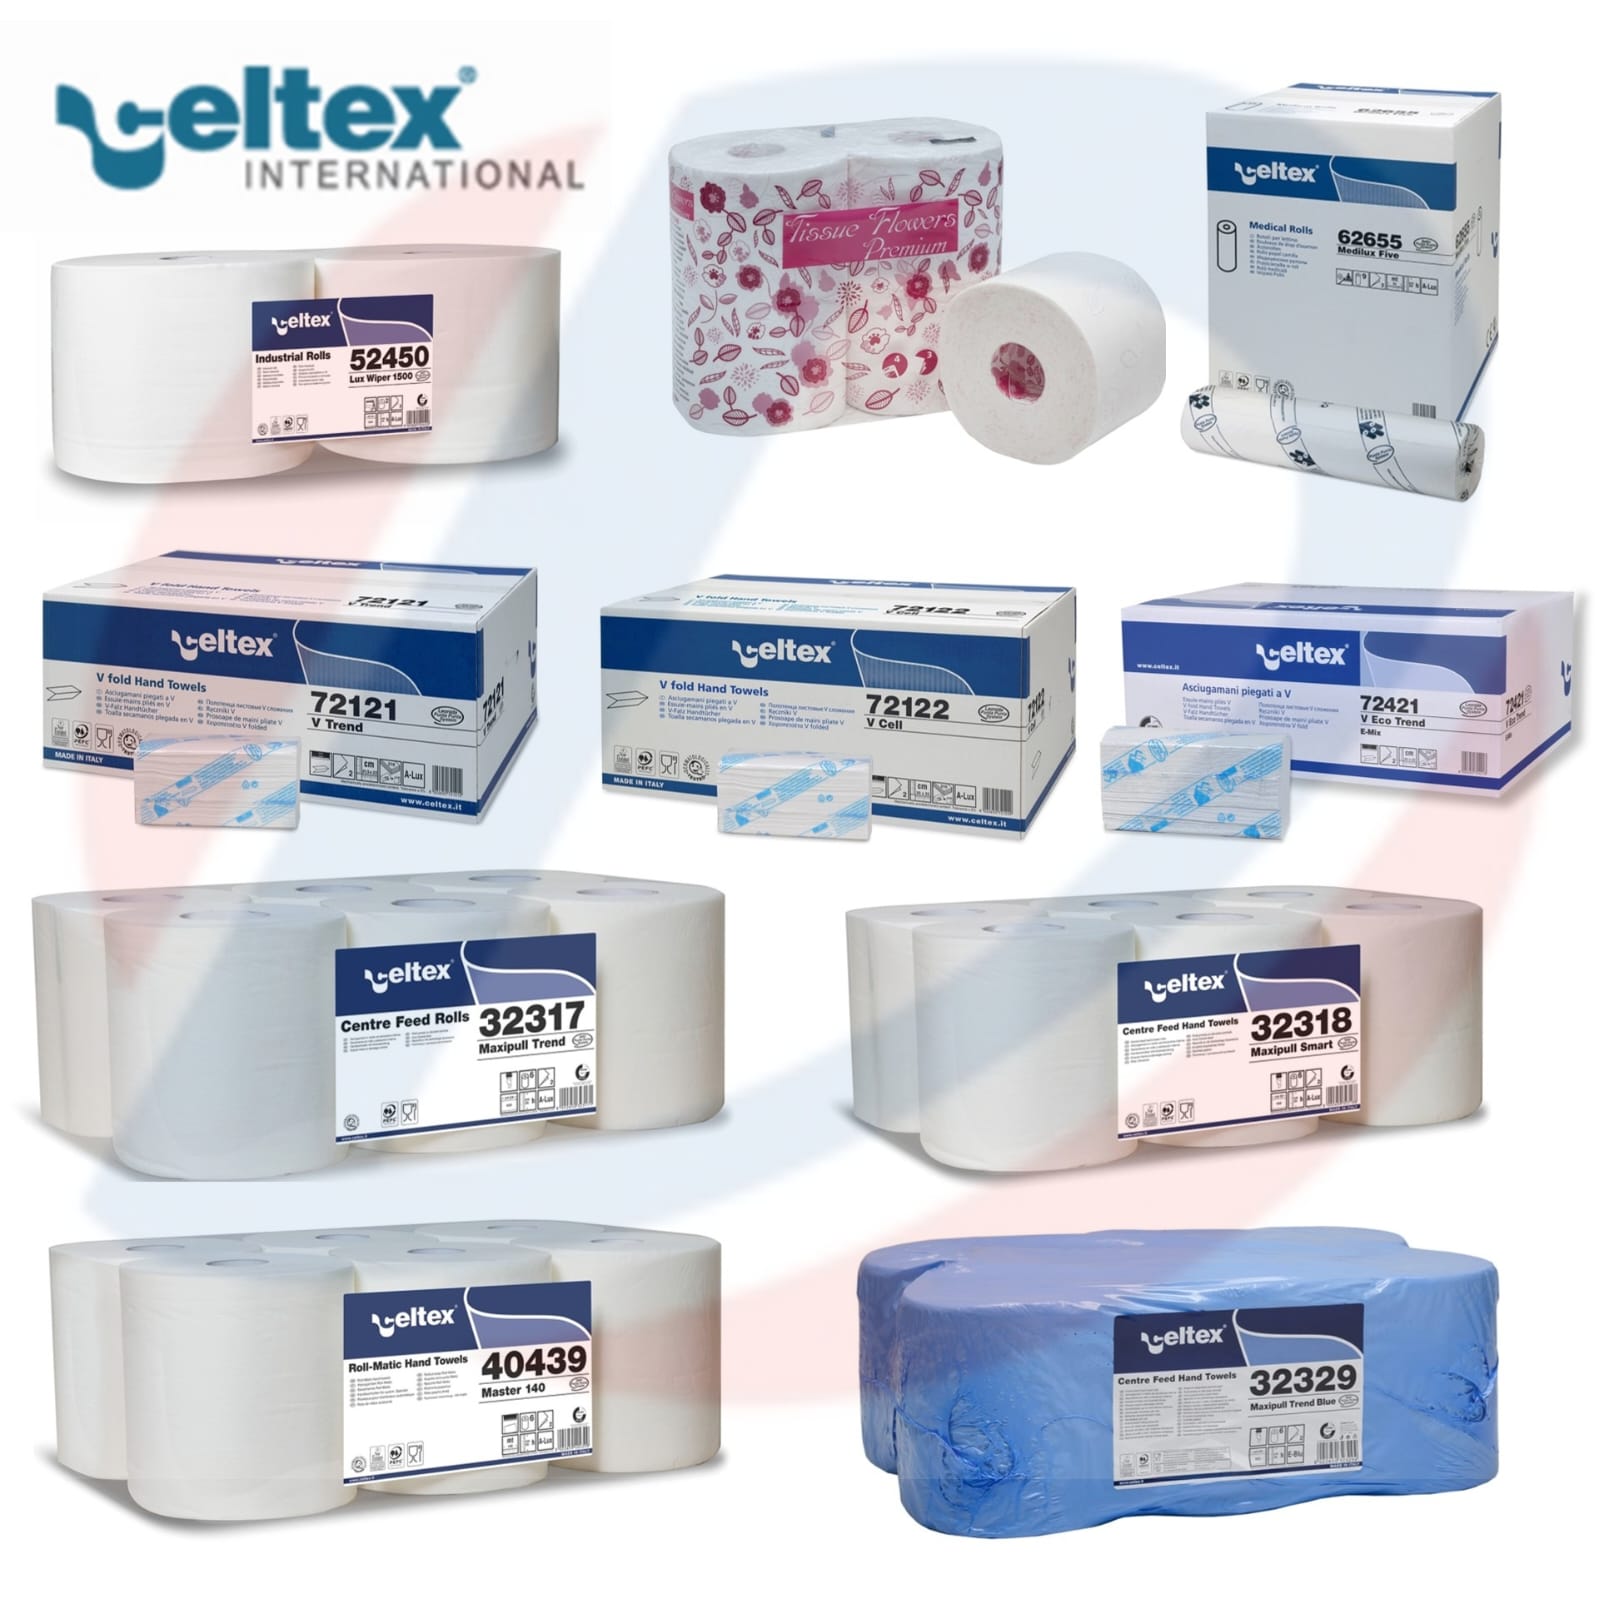 Celtex Tissue Paper Products